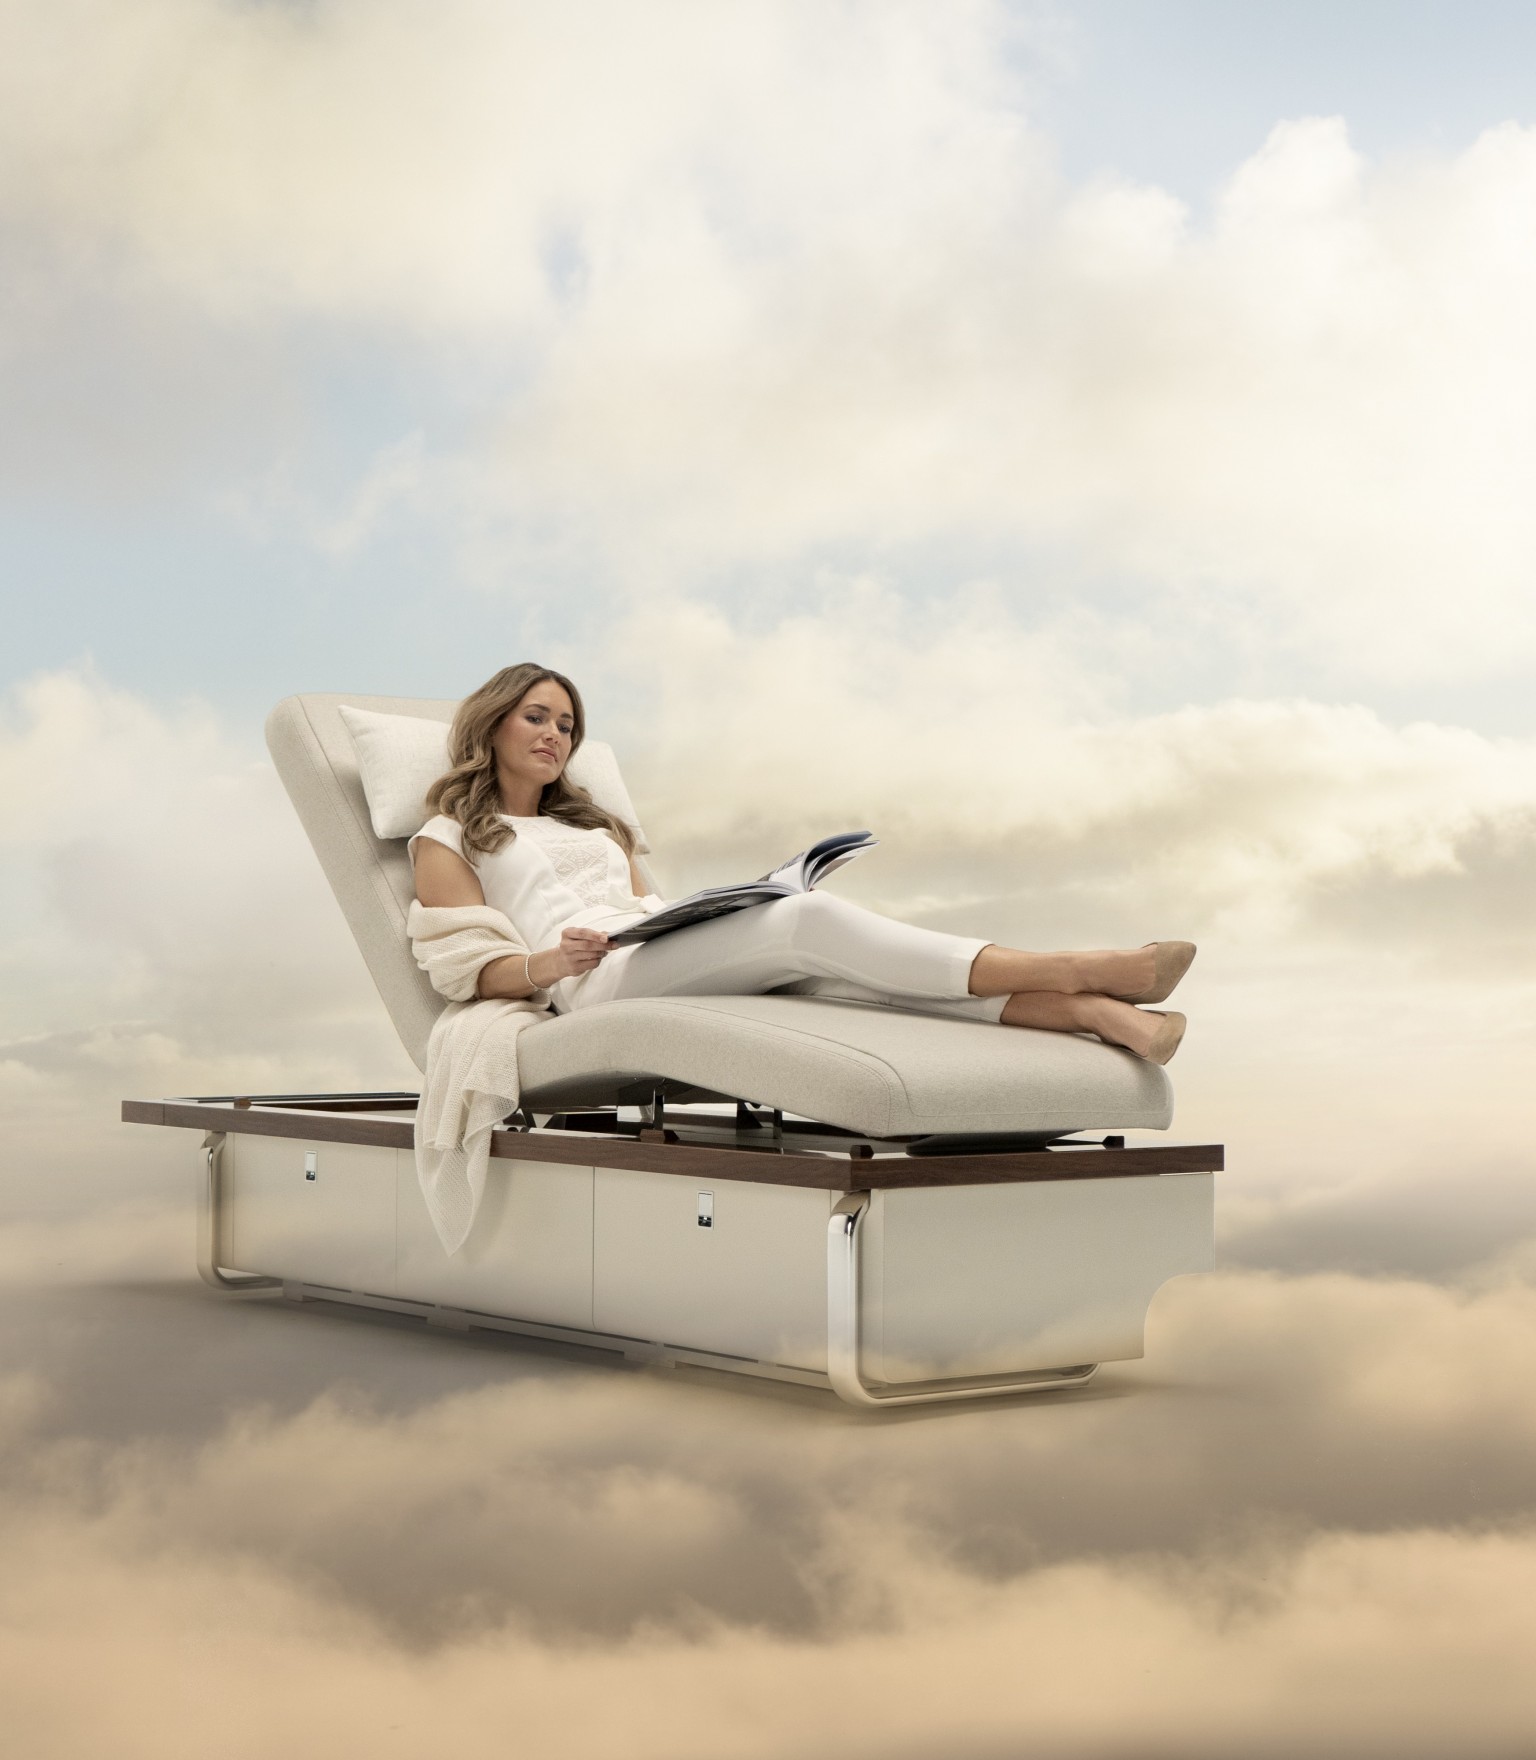 The Nuage chaise